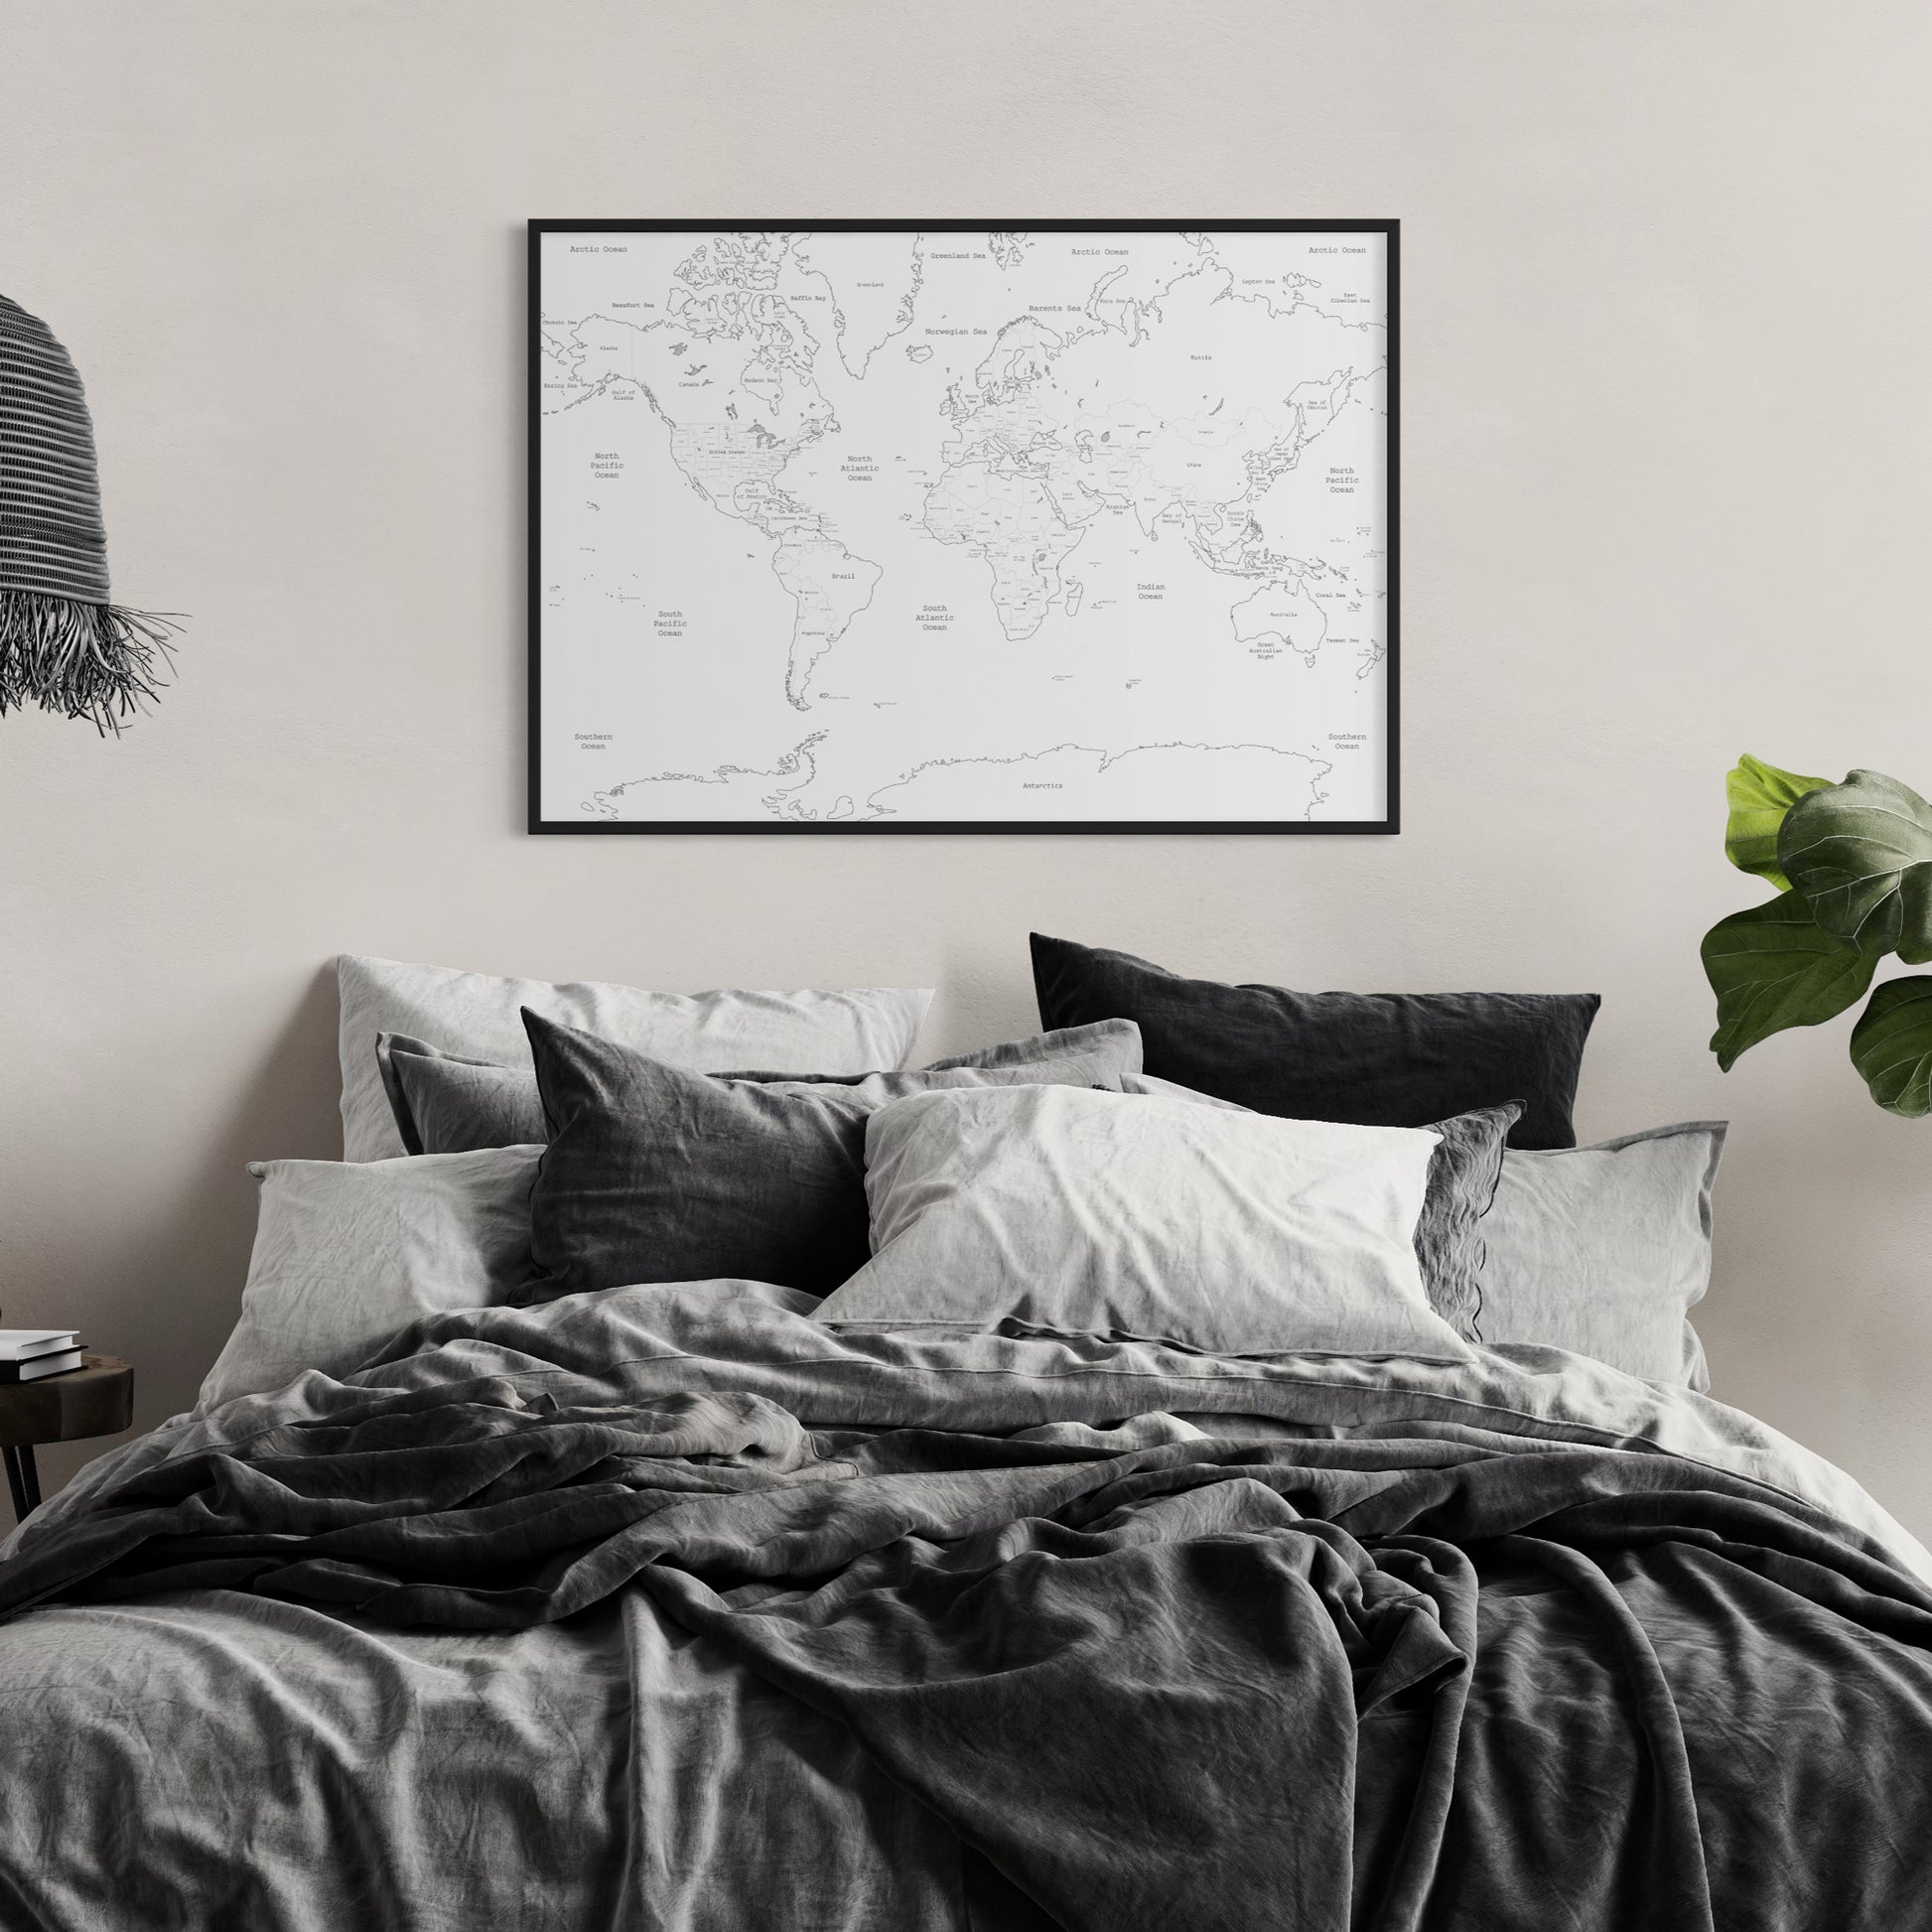 Blank World Map Print Poster on Bedroom Wall